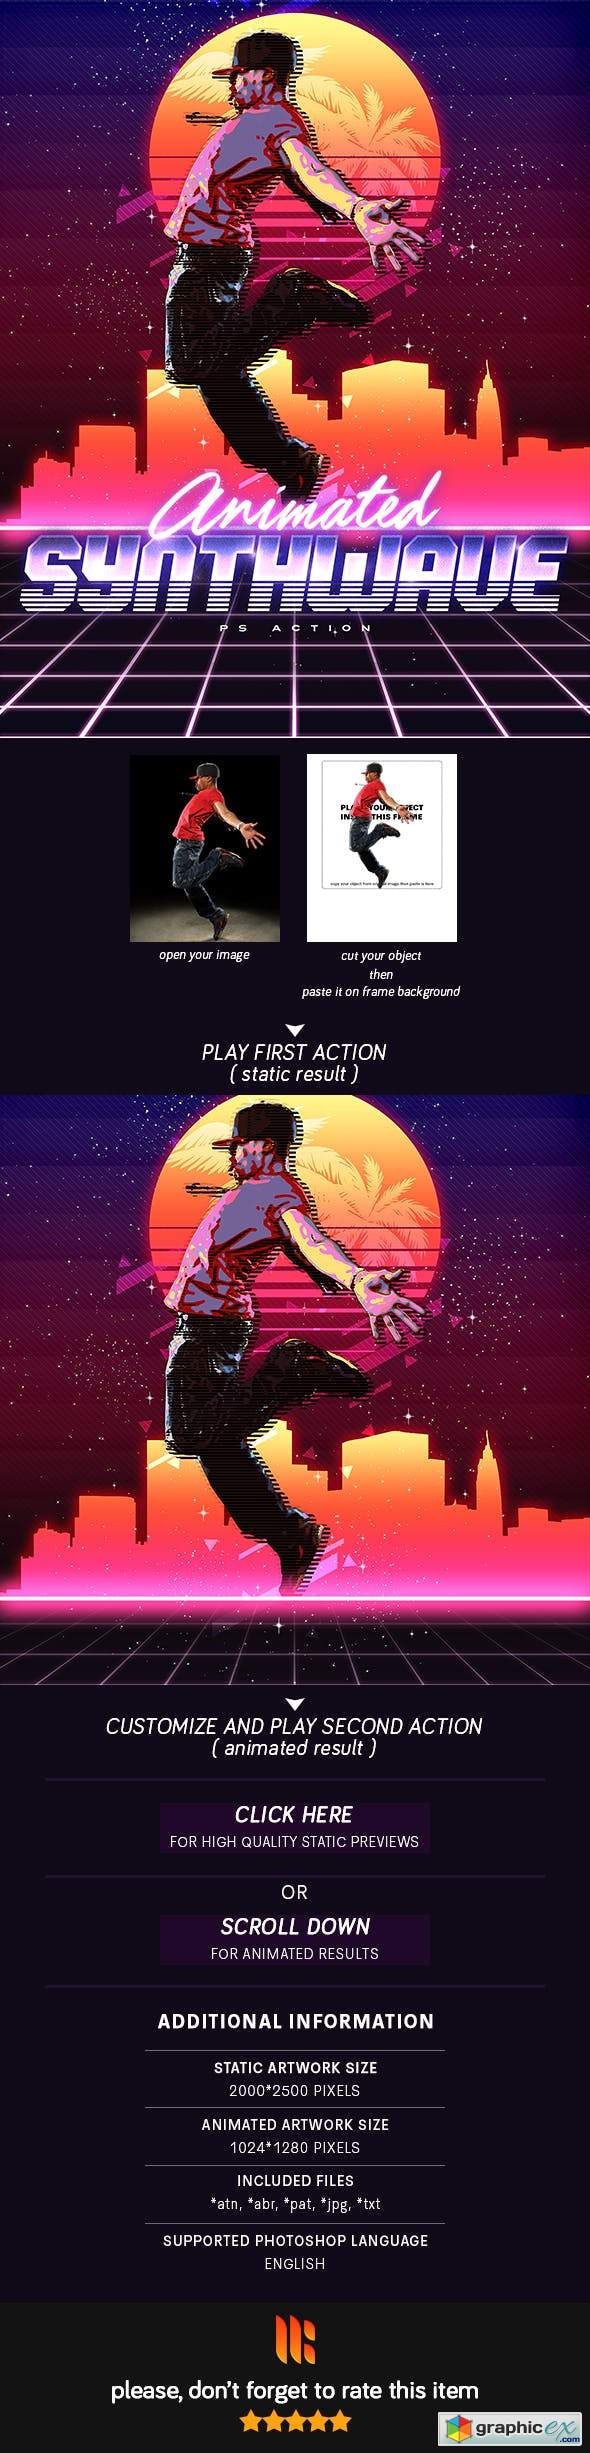 Animated 80's Synthwave Poster - Photoshop Action